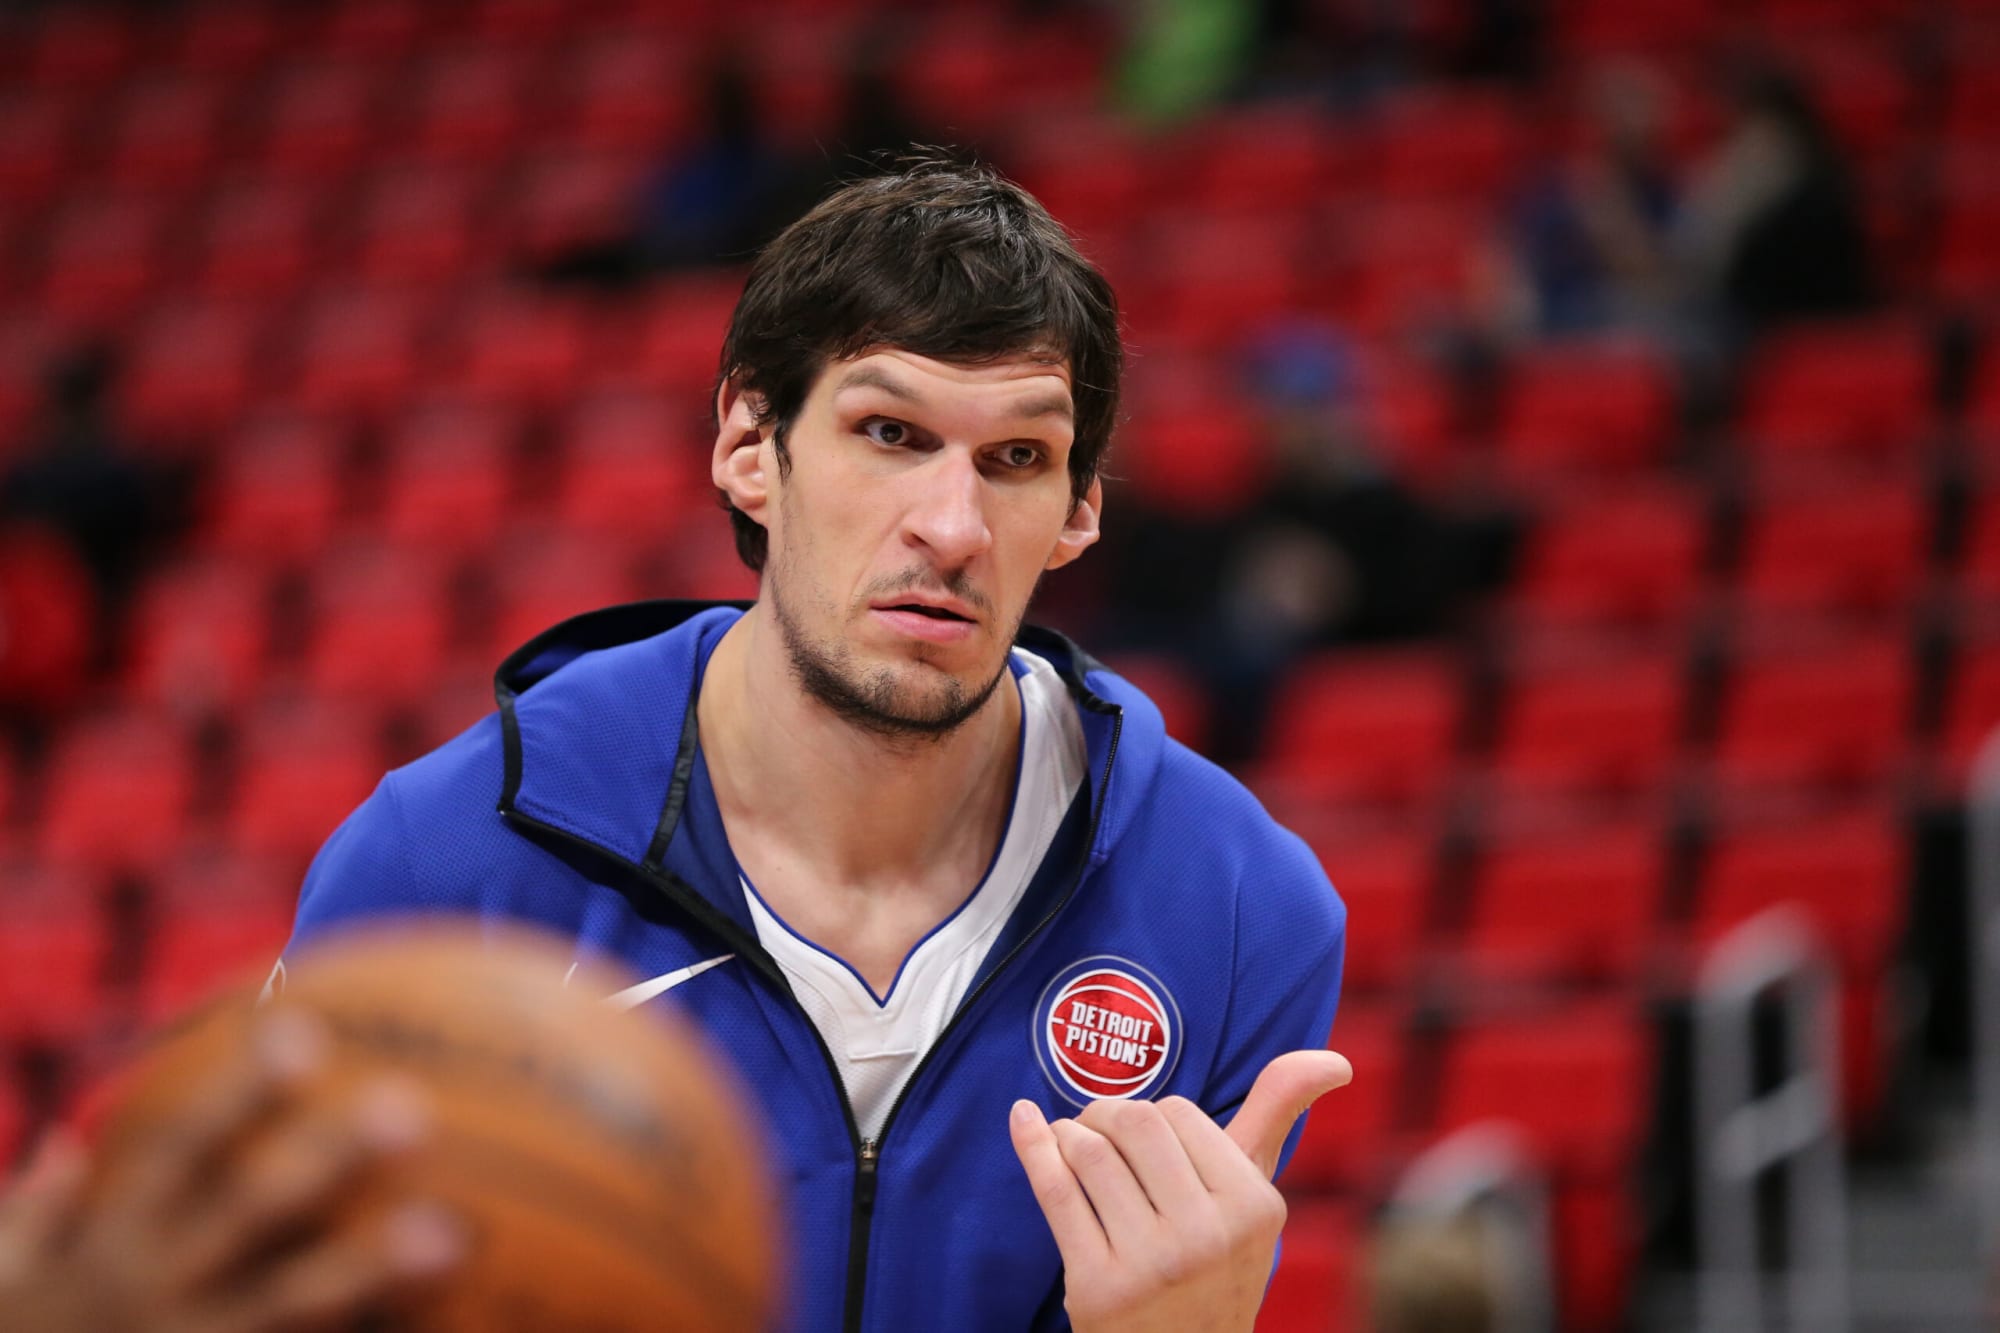 Former Detroit Pistons players, Kevin Knox and Boban Marjanovic, find new deals in the NBA